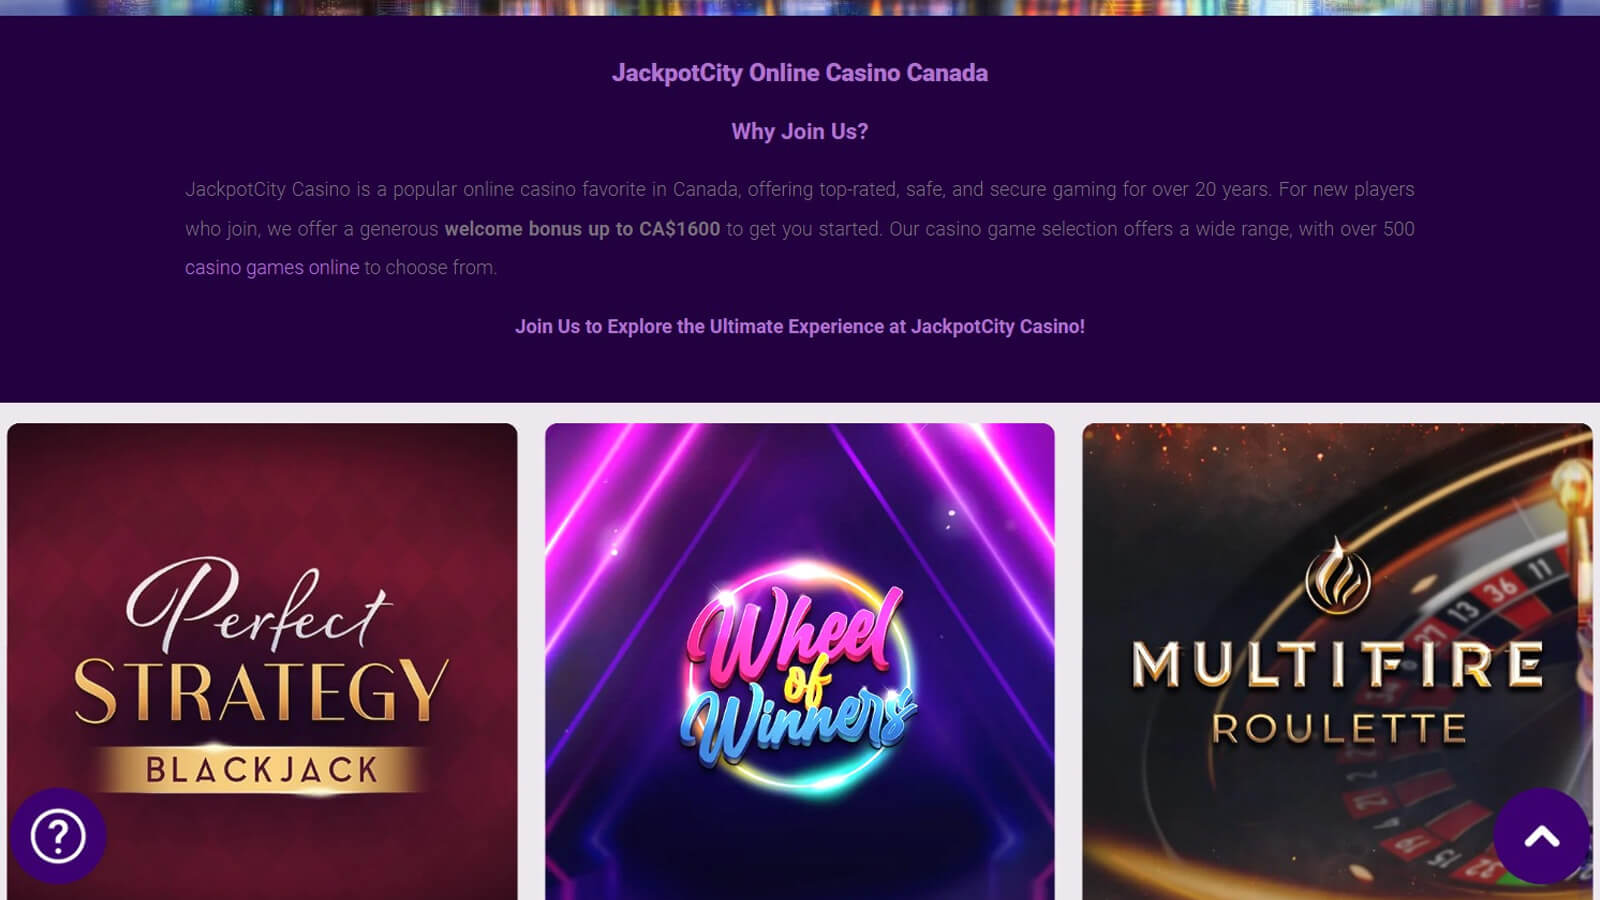 Jackpot City Casino#2. The best casino online Canada has for high-rollers